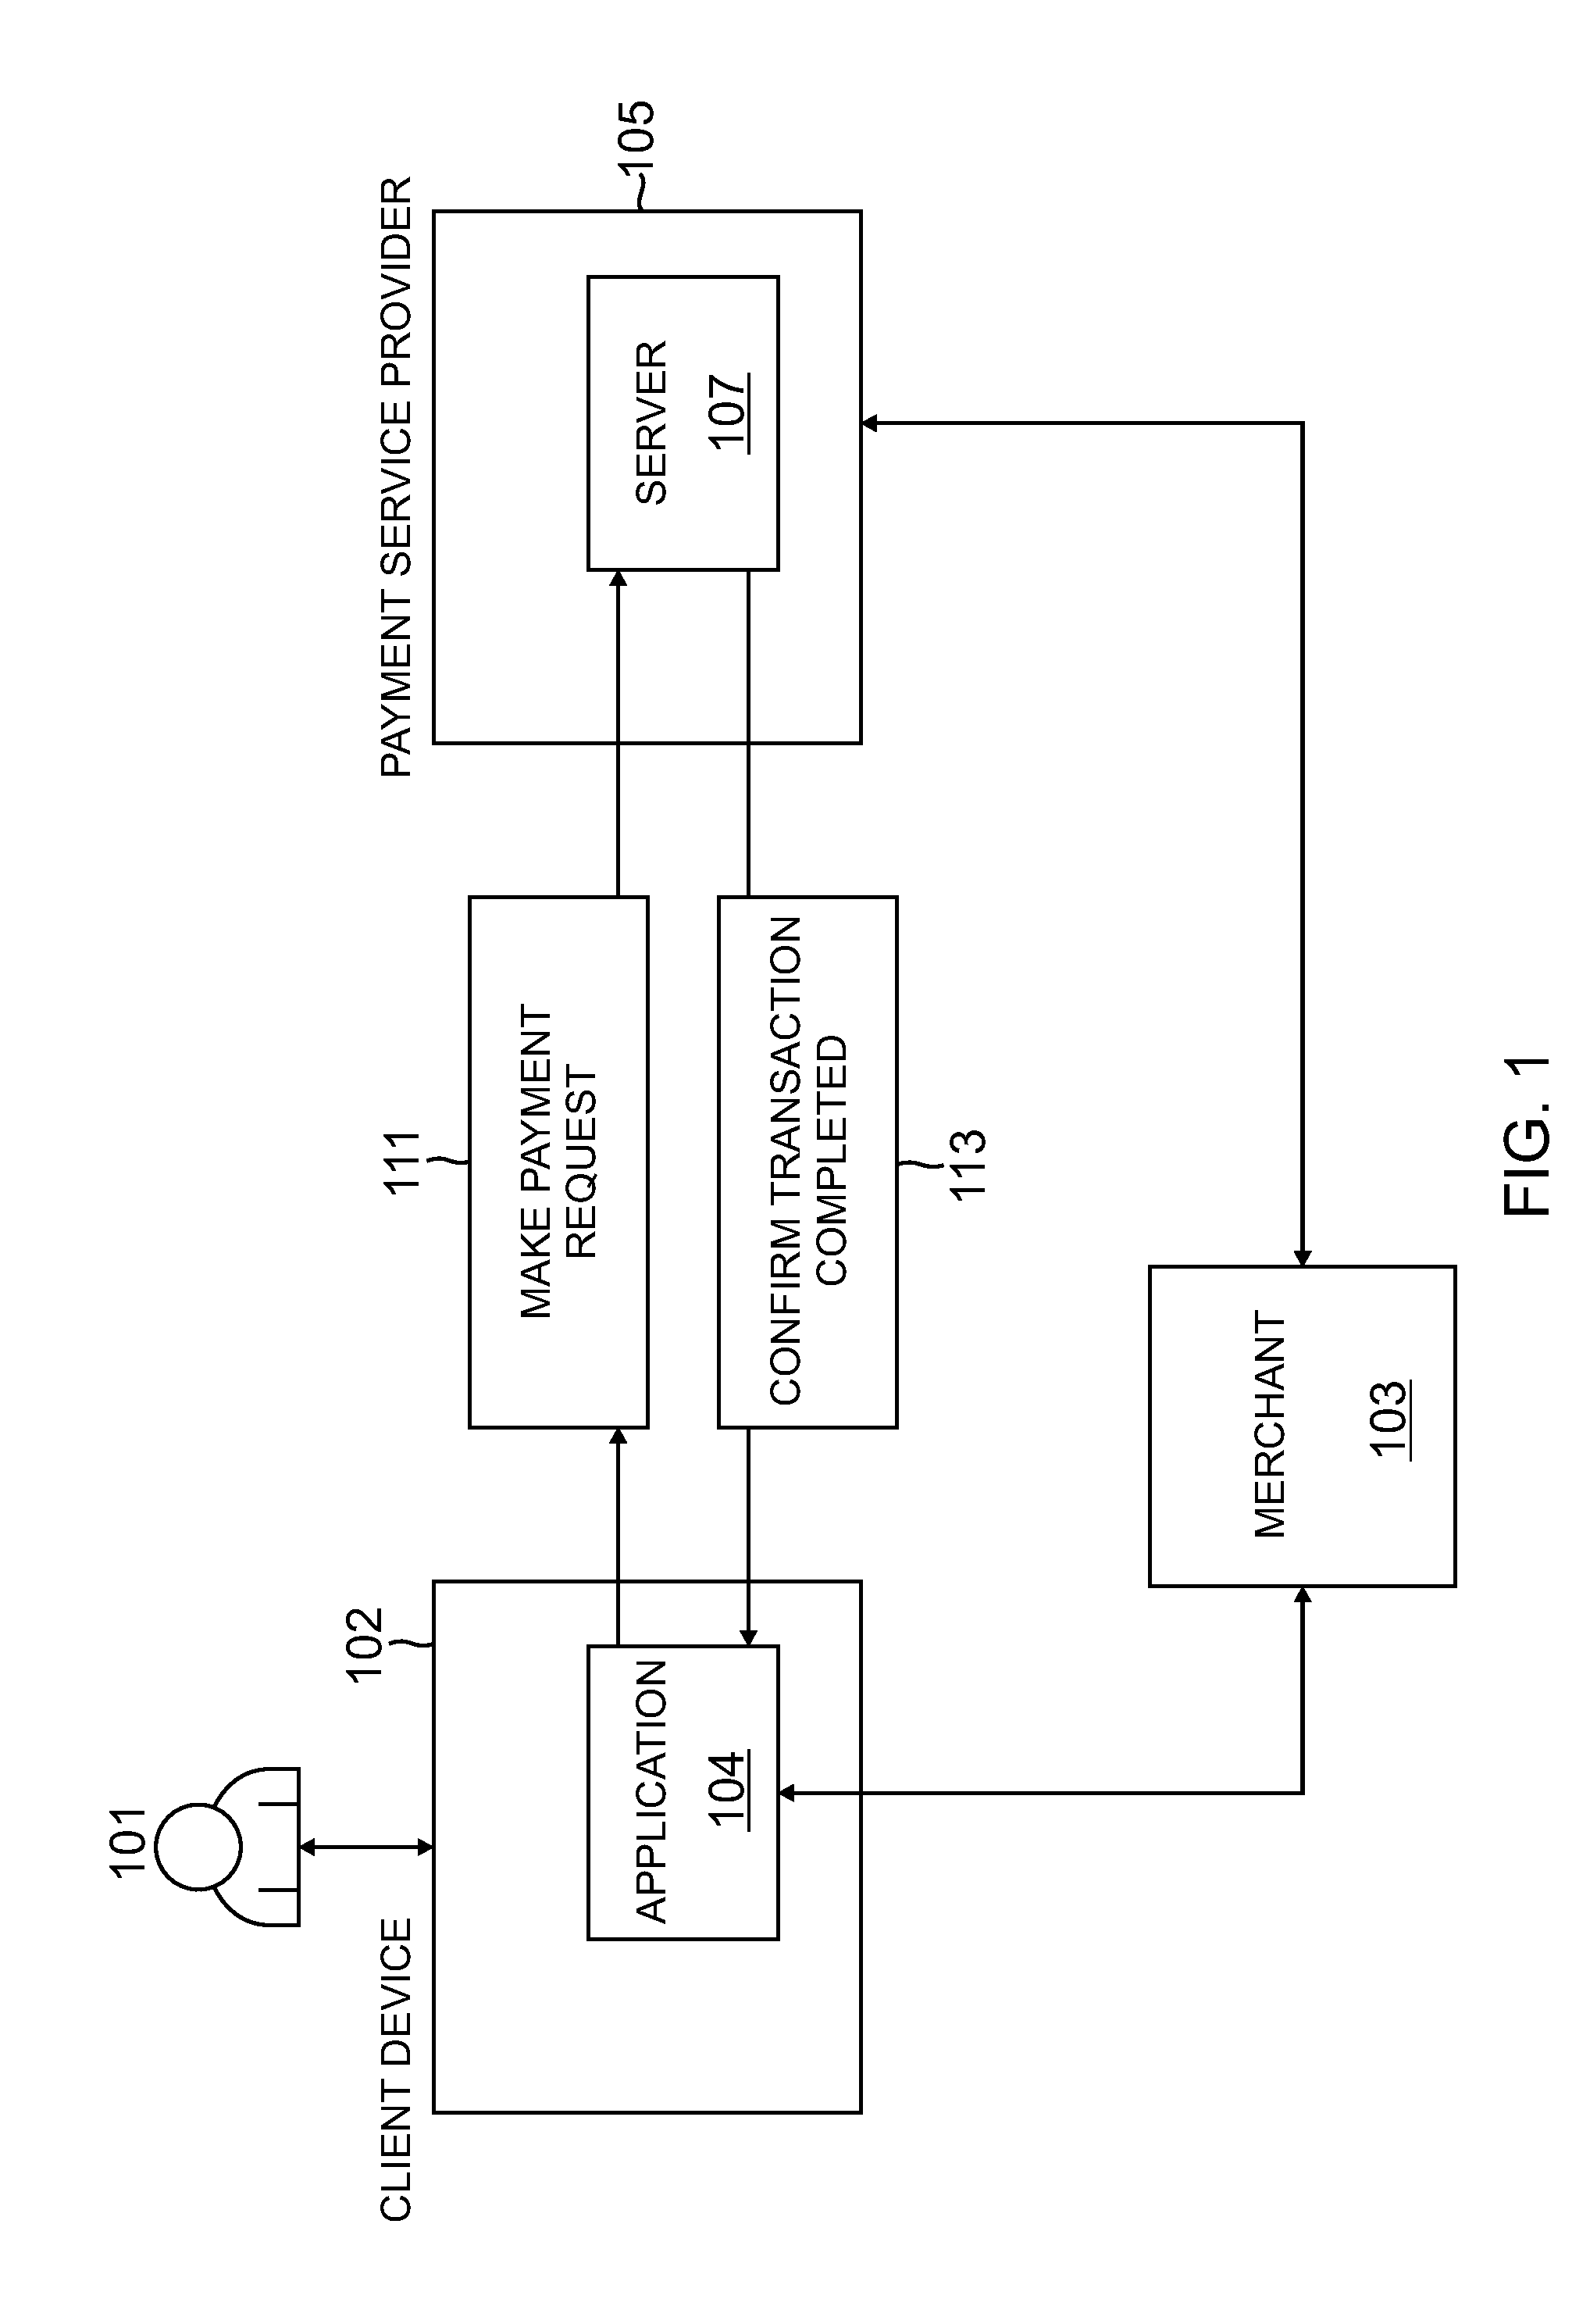 Device specific remote disabling of applications